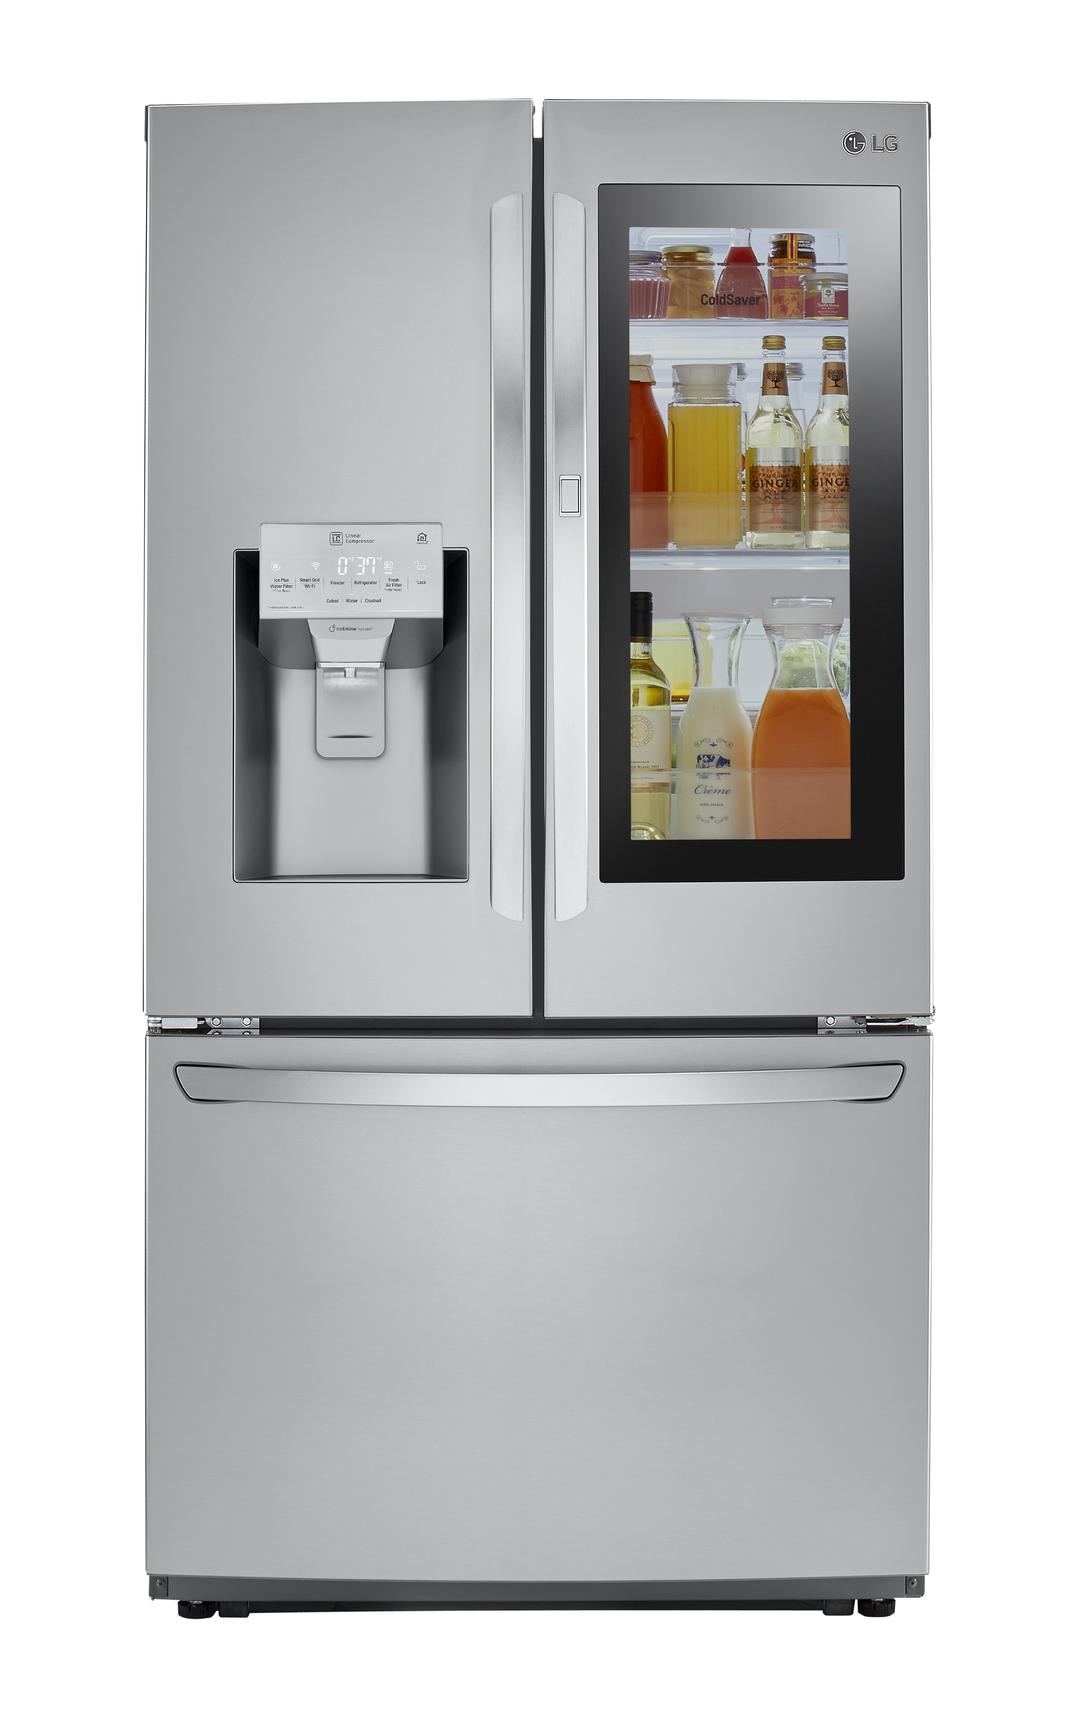 LG - 35.8 Inch 21.9 cu. ft French Door Refrigerator in Stainless - LFXC22596S